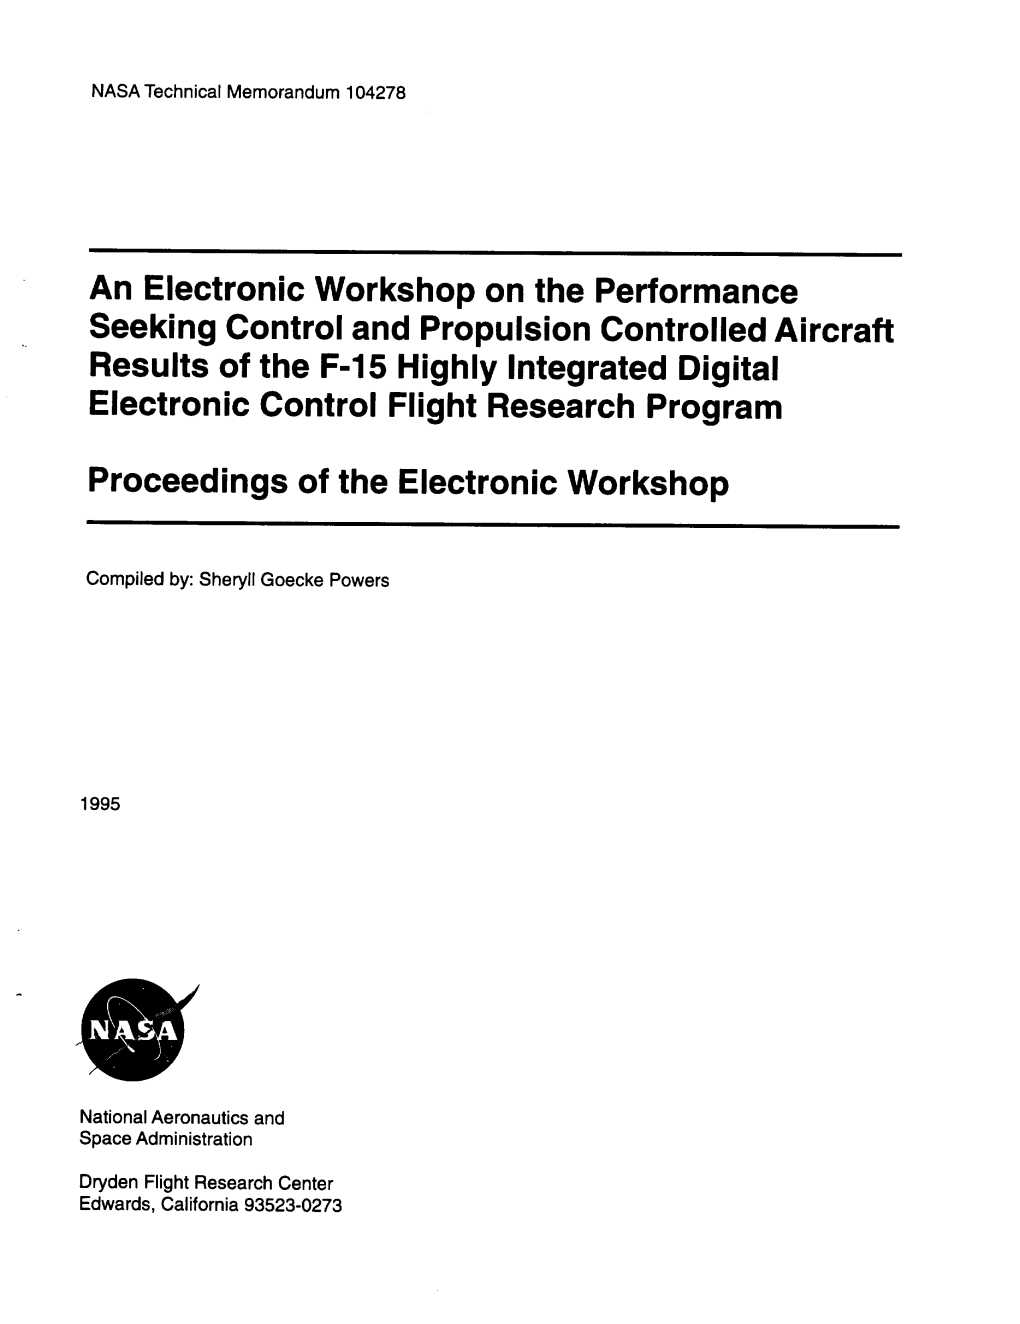 An Electronic Workshop on the Performance Seeking Control and Propulsion Controlled Aircraft Results of the F-15 Highly Integrat